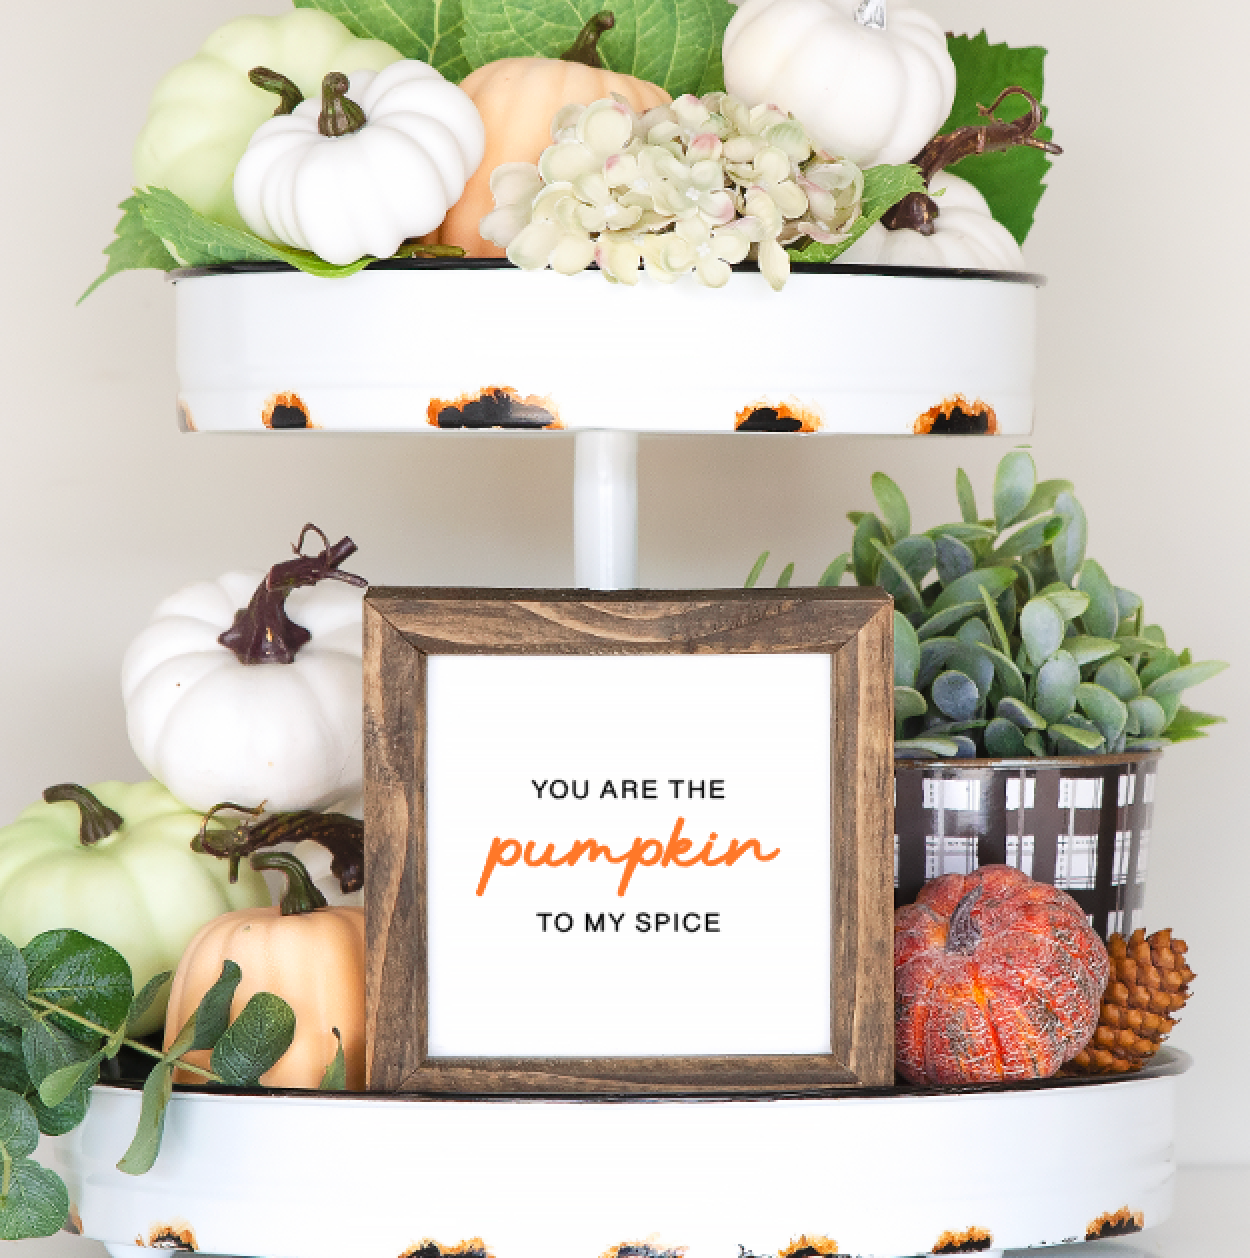 Give Thanks Tray Signs